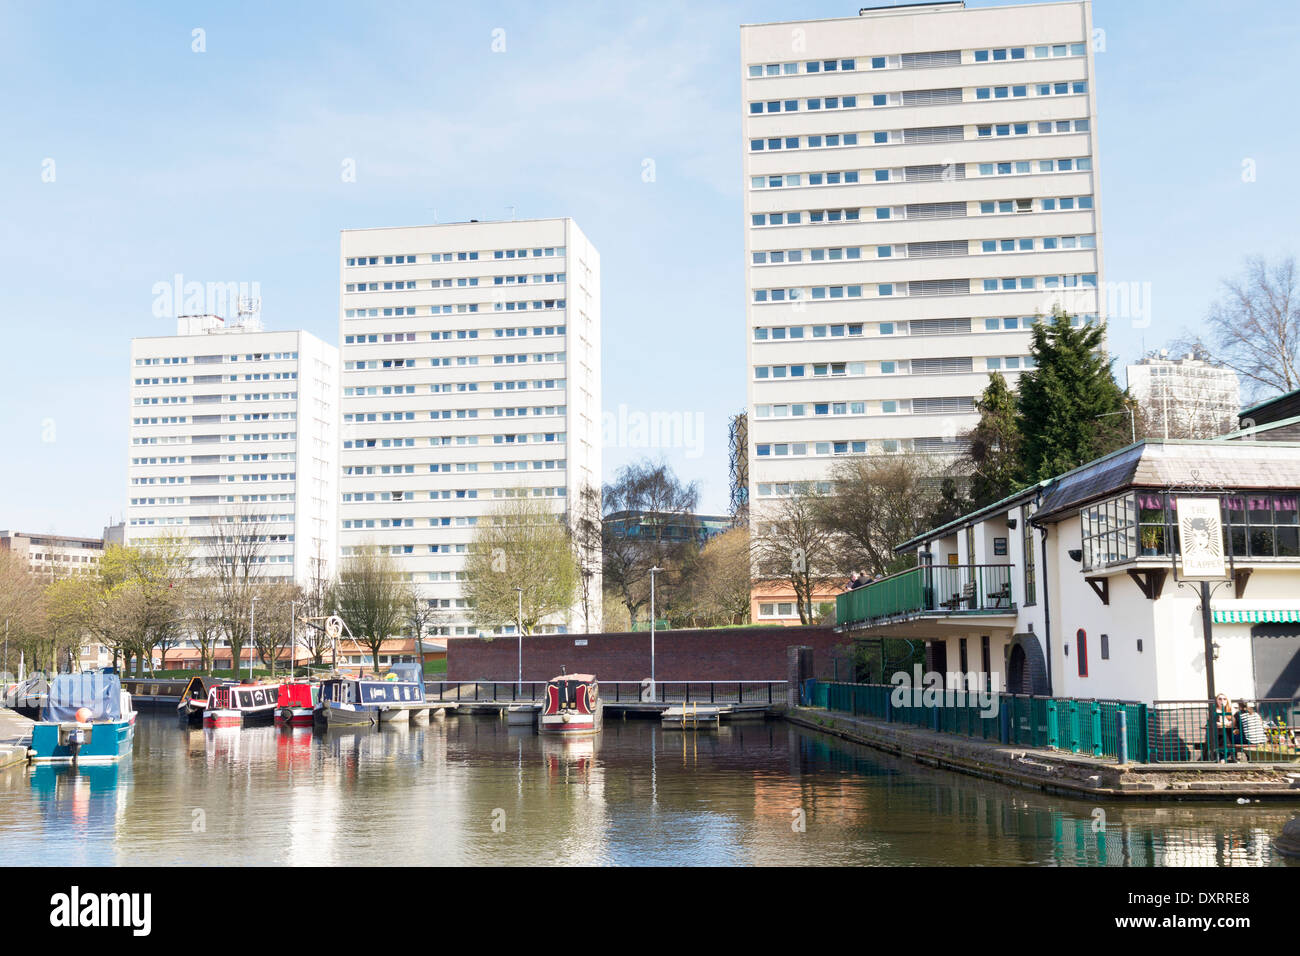 Blocks of high rise flats overlooking the canal in Birmingham UK Stock Photo